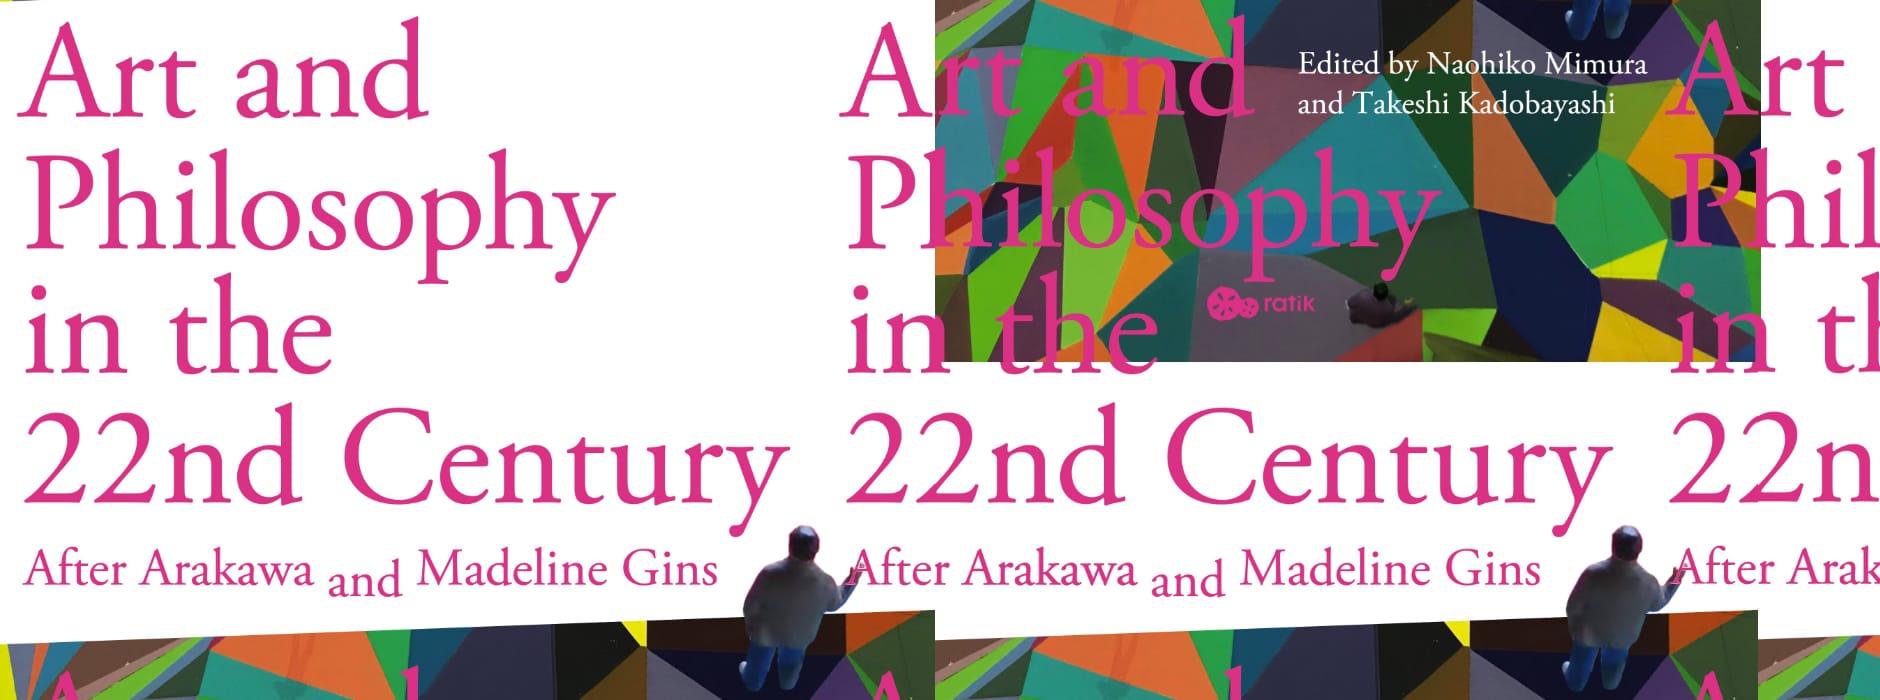 Art and Philosophy in the 22nd Century: After Arakawa and Madeline Gins